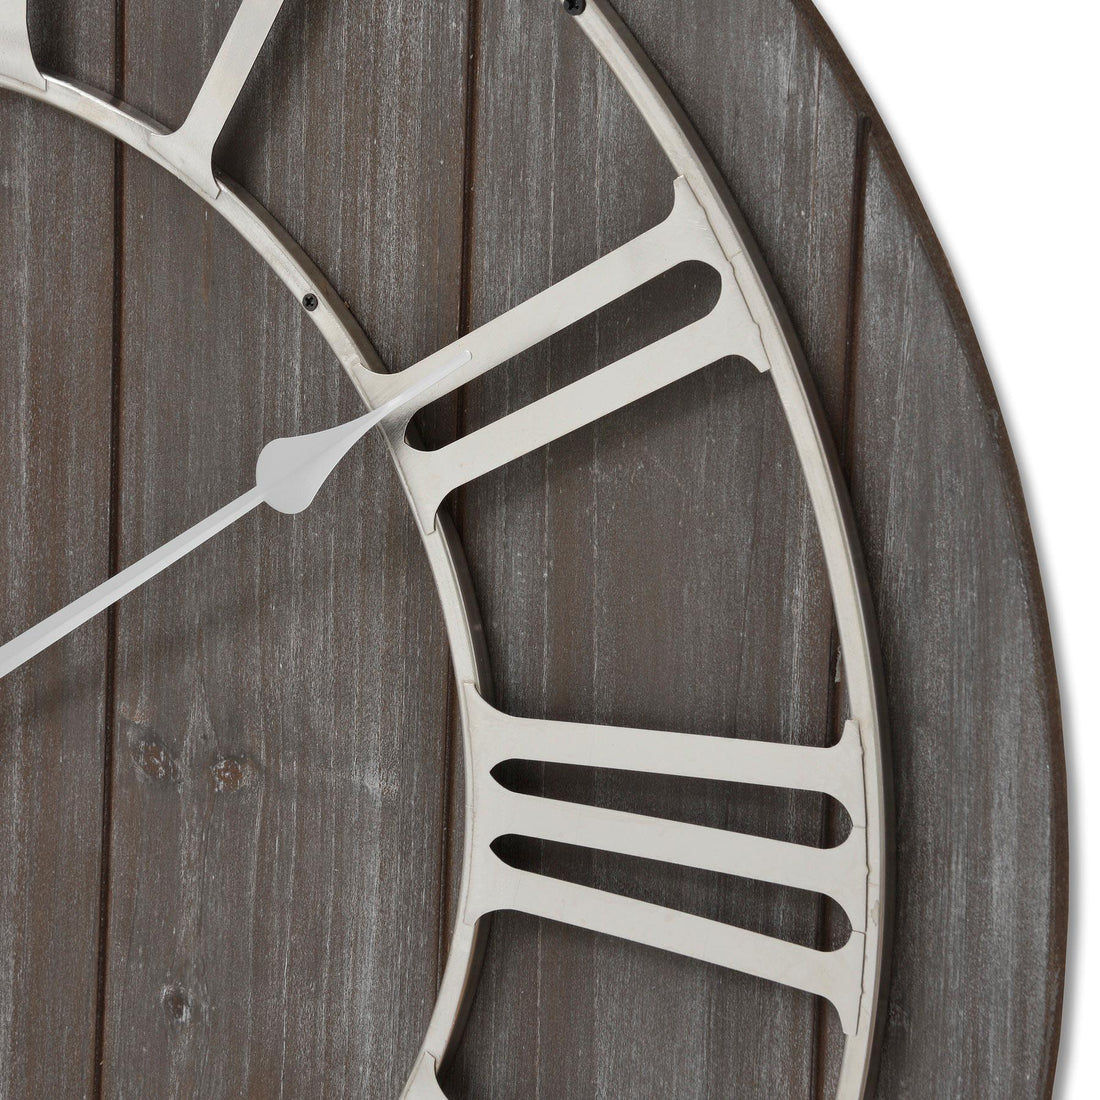 Wooden Clock With Contrasting Nickel Detail - £129.95 - Wall Clocks 